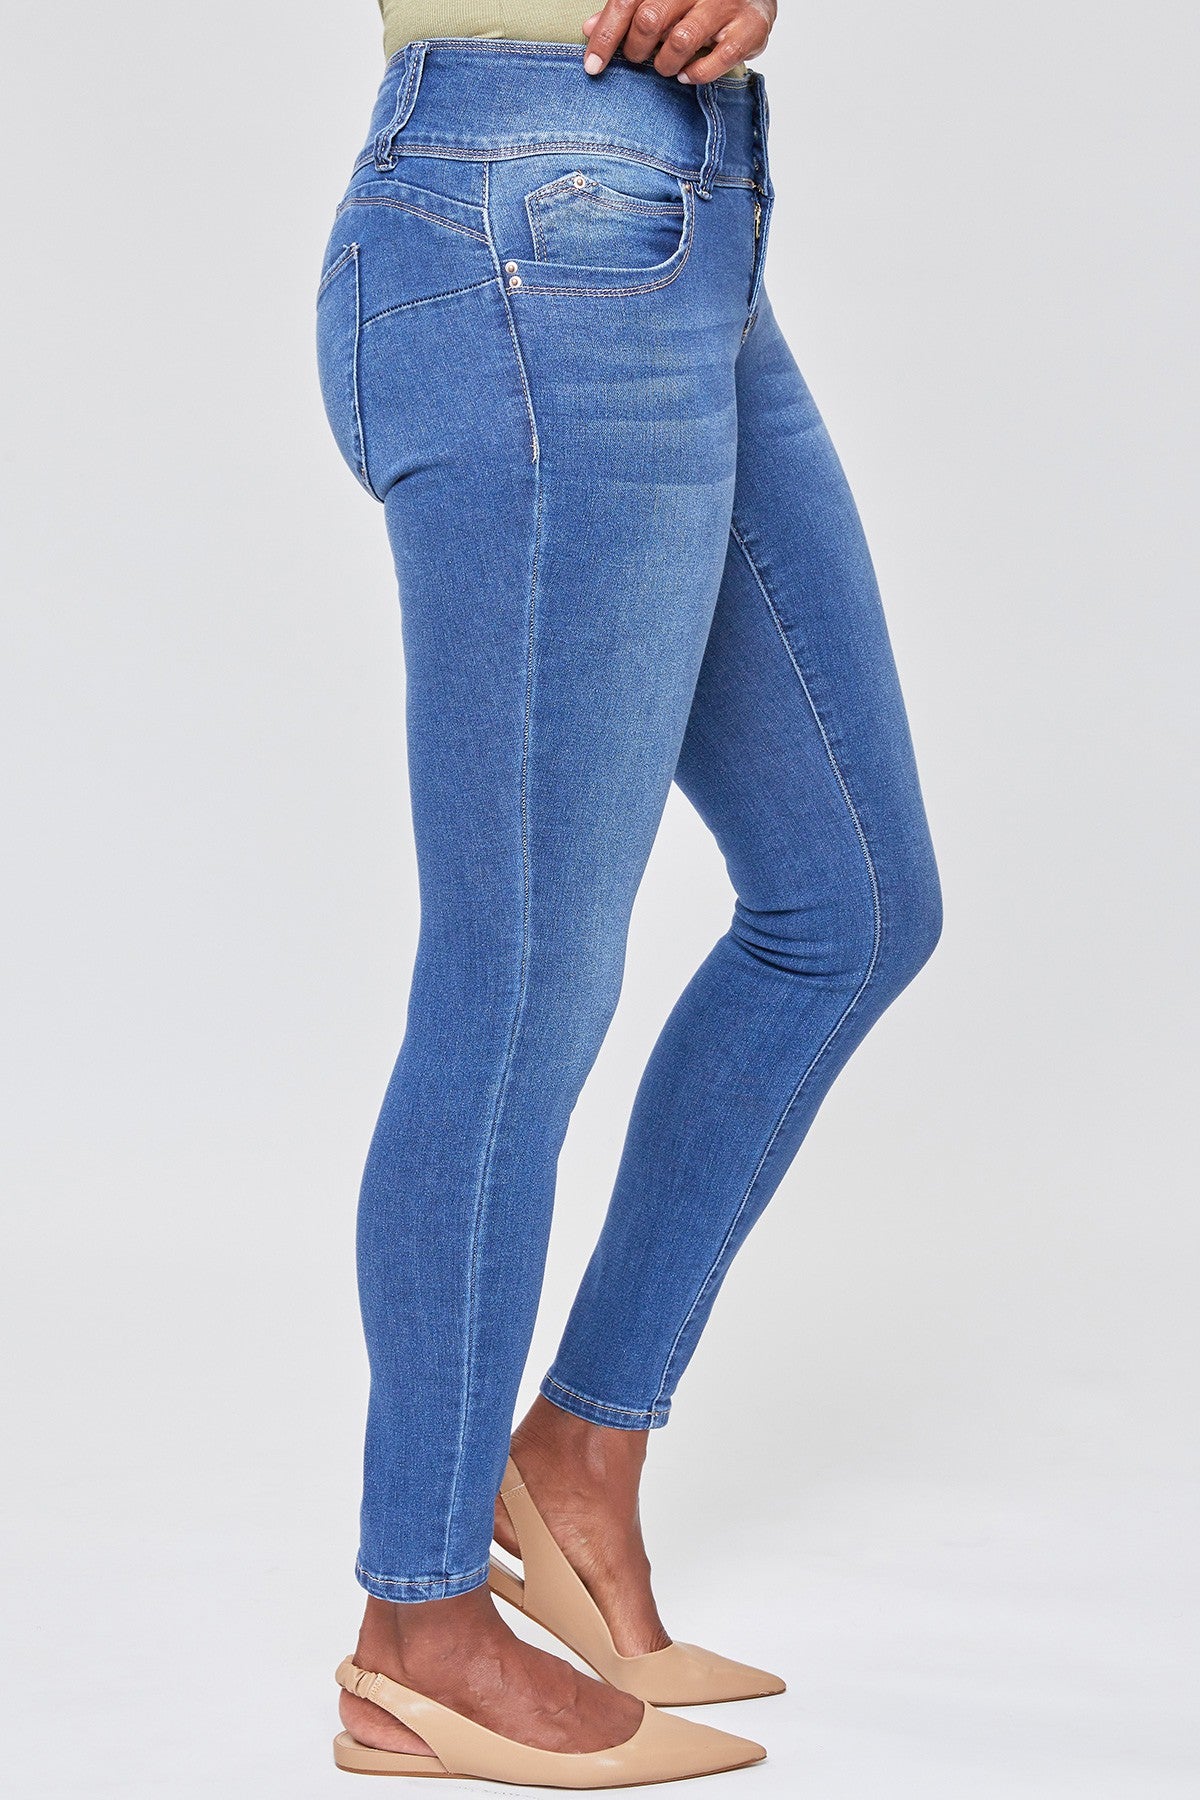 Just What You Need Betta Butt Jeans By Royalty